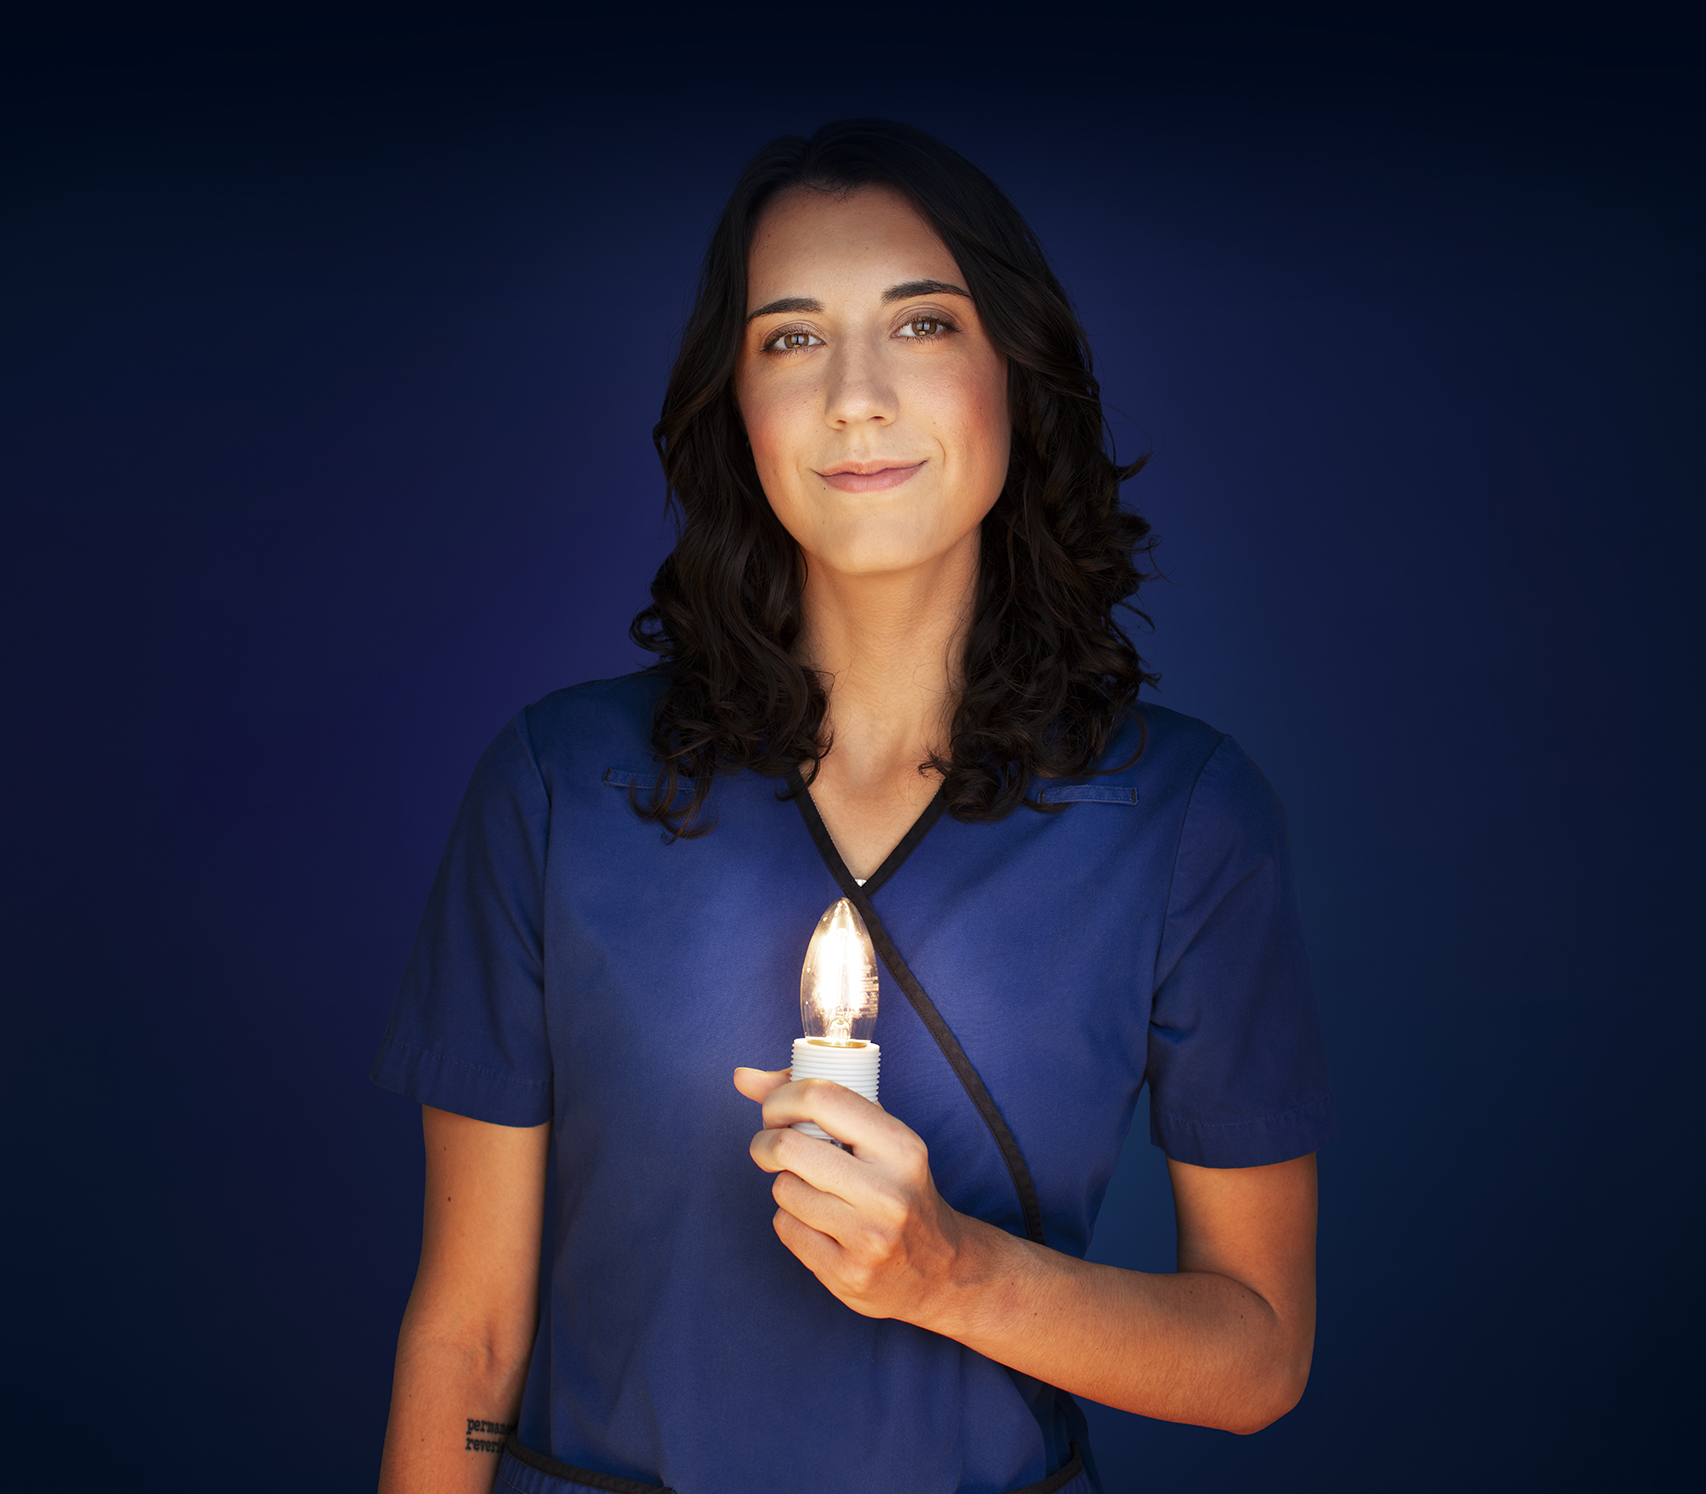 Sainte-Justine nurse Sandrine, wearing blue hospital scrubs and proudly holding a glowing candle-shaped light in her left hand.